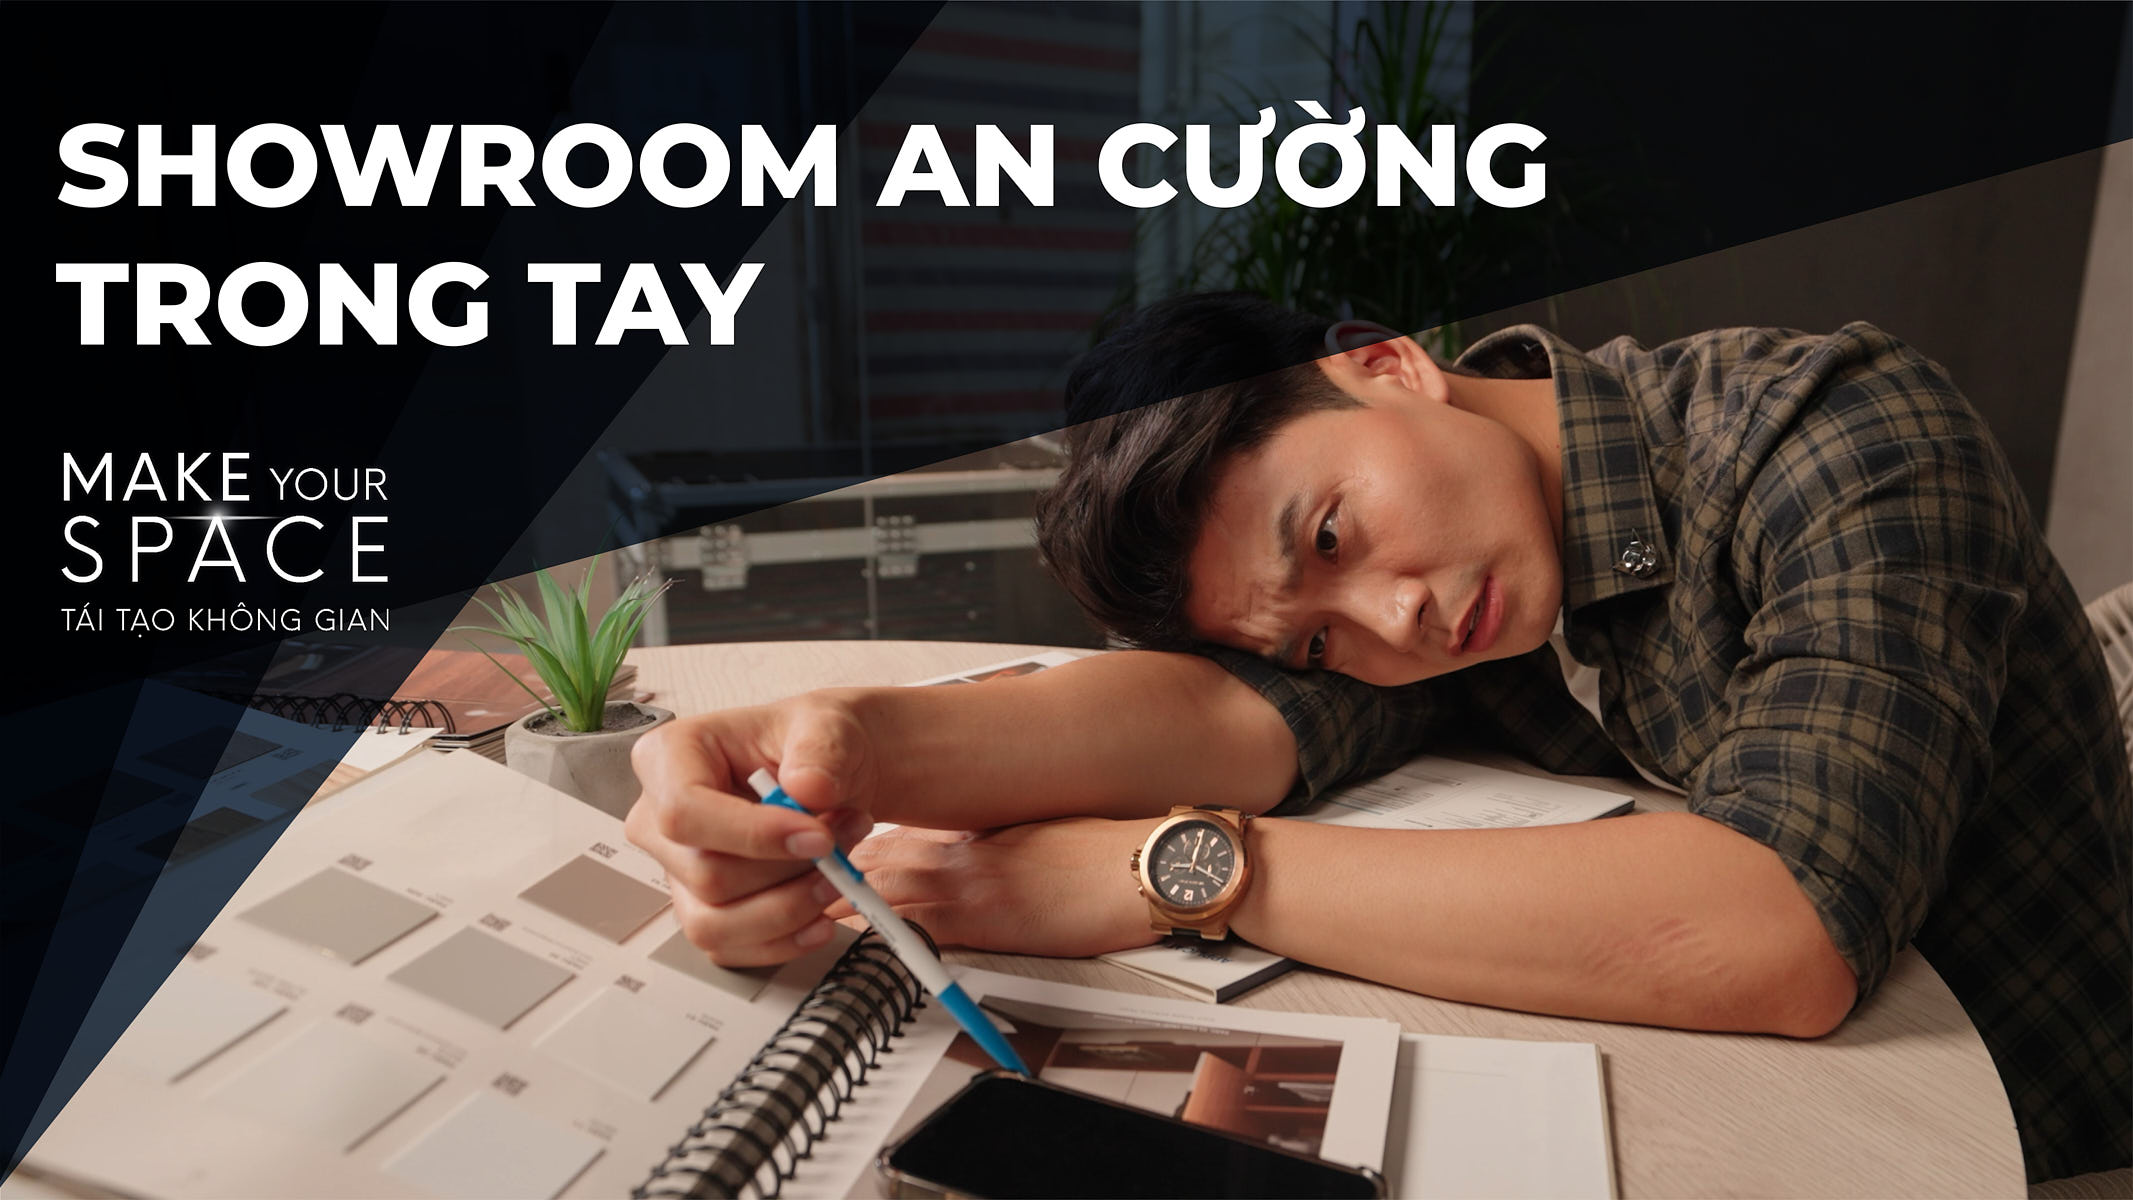 Why Go Far? Experience Make Your Space Right at Home | An Cuong